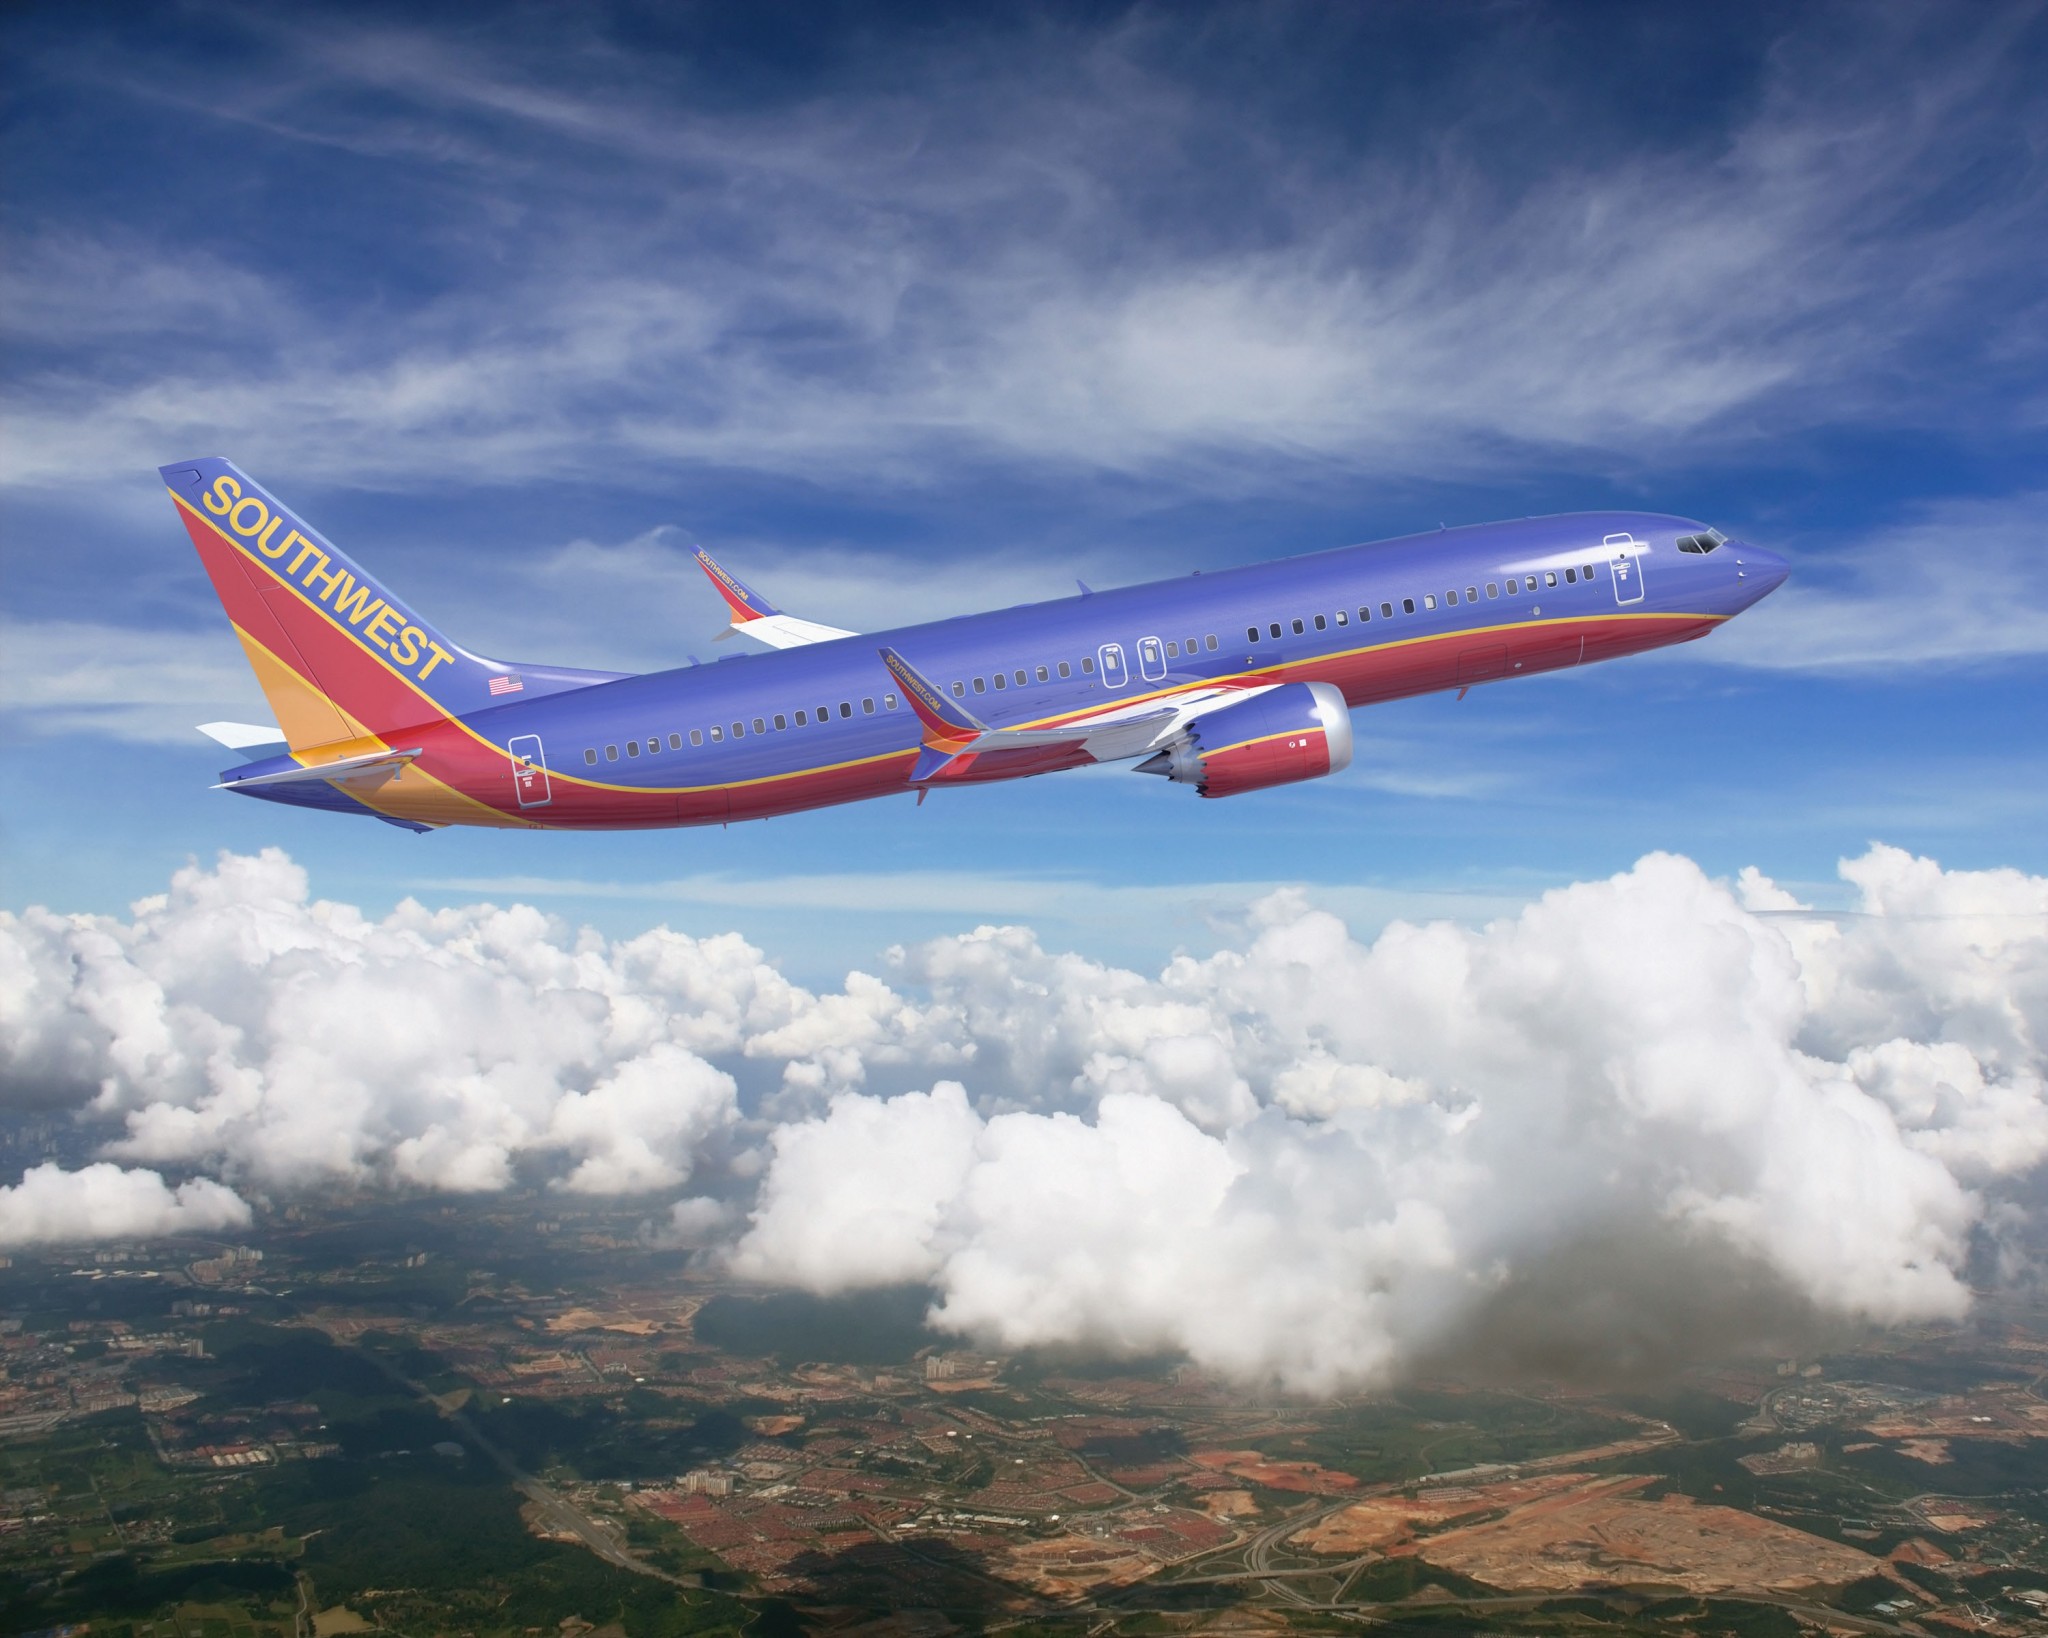 Southwest to reinstate dividend in 2023